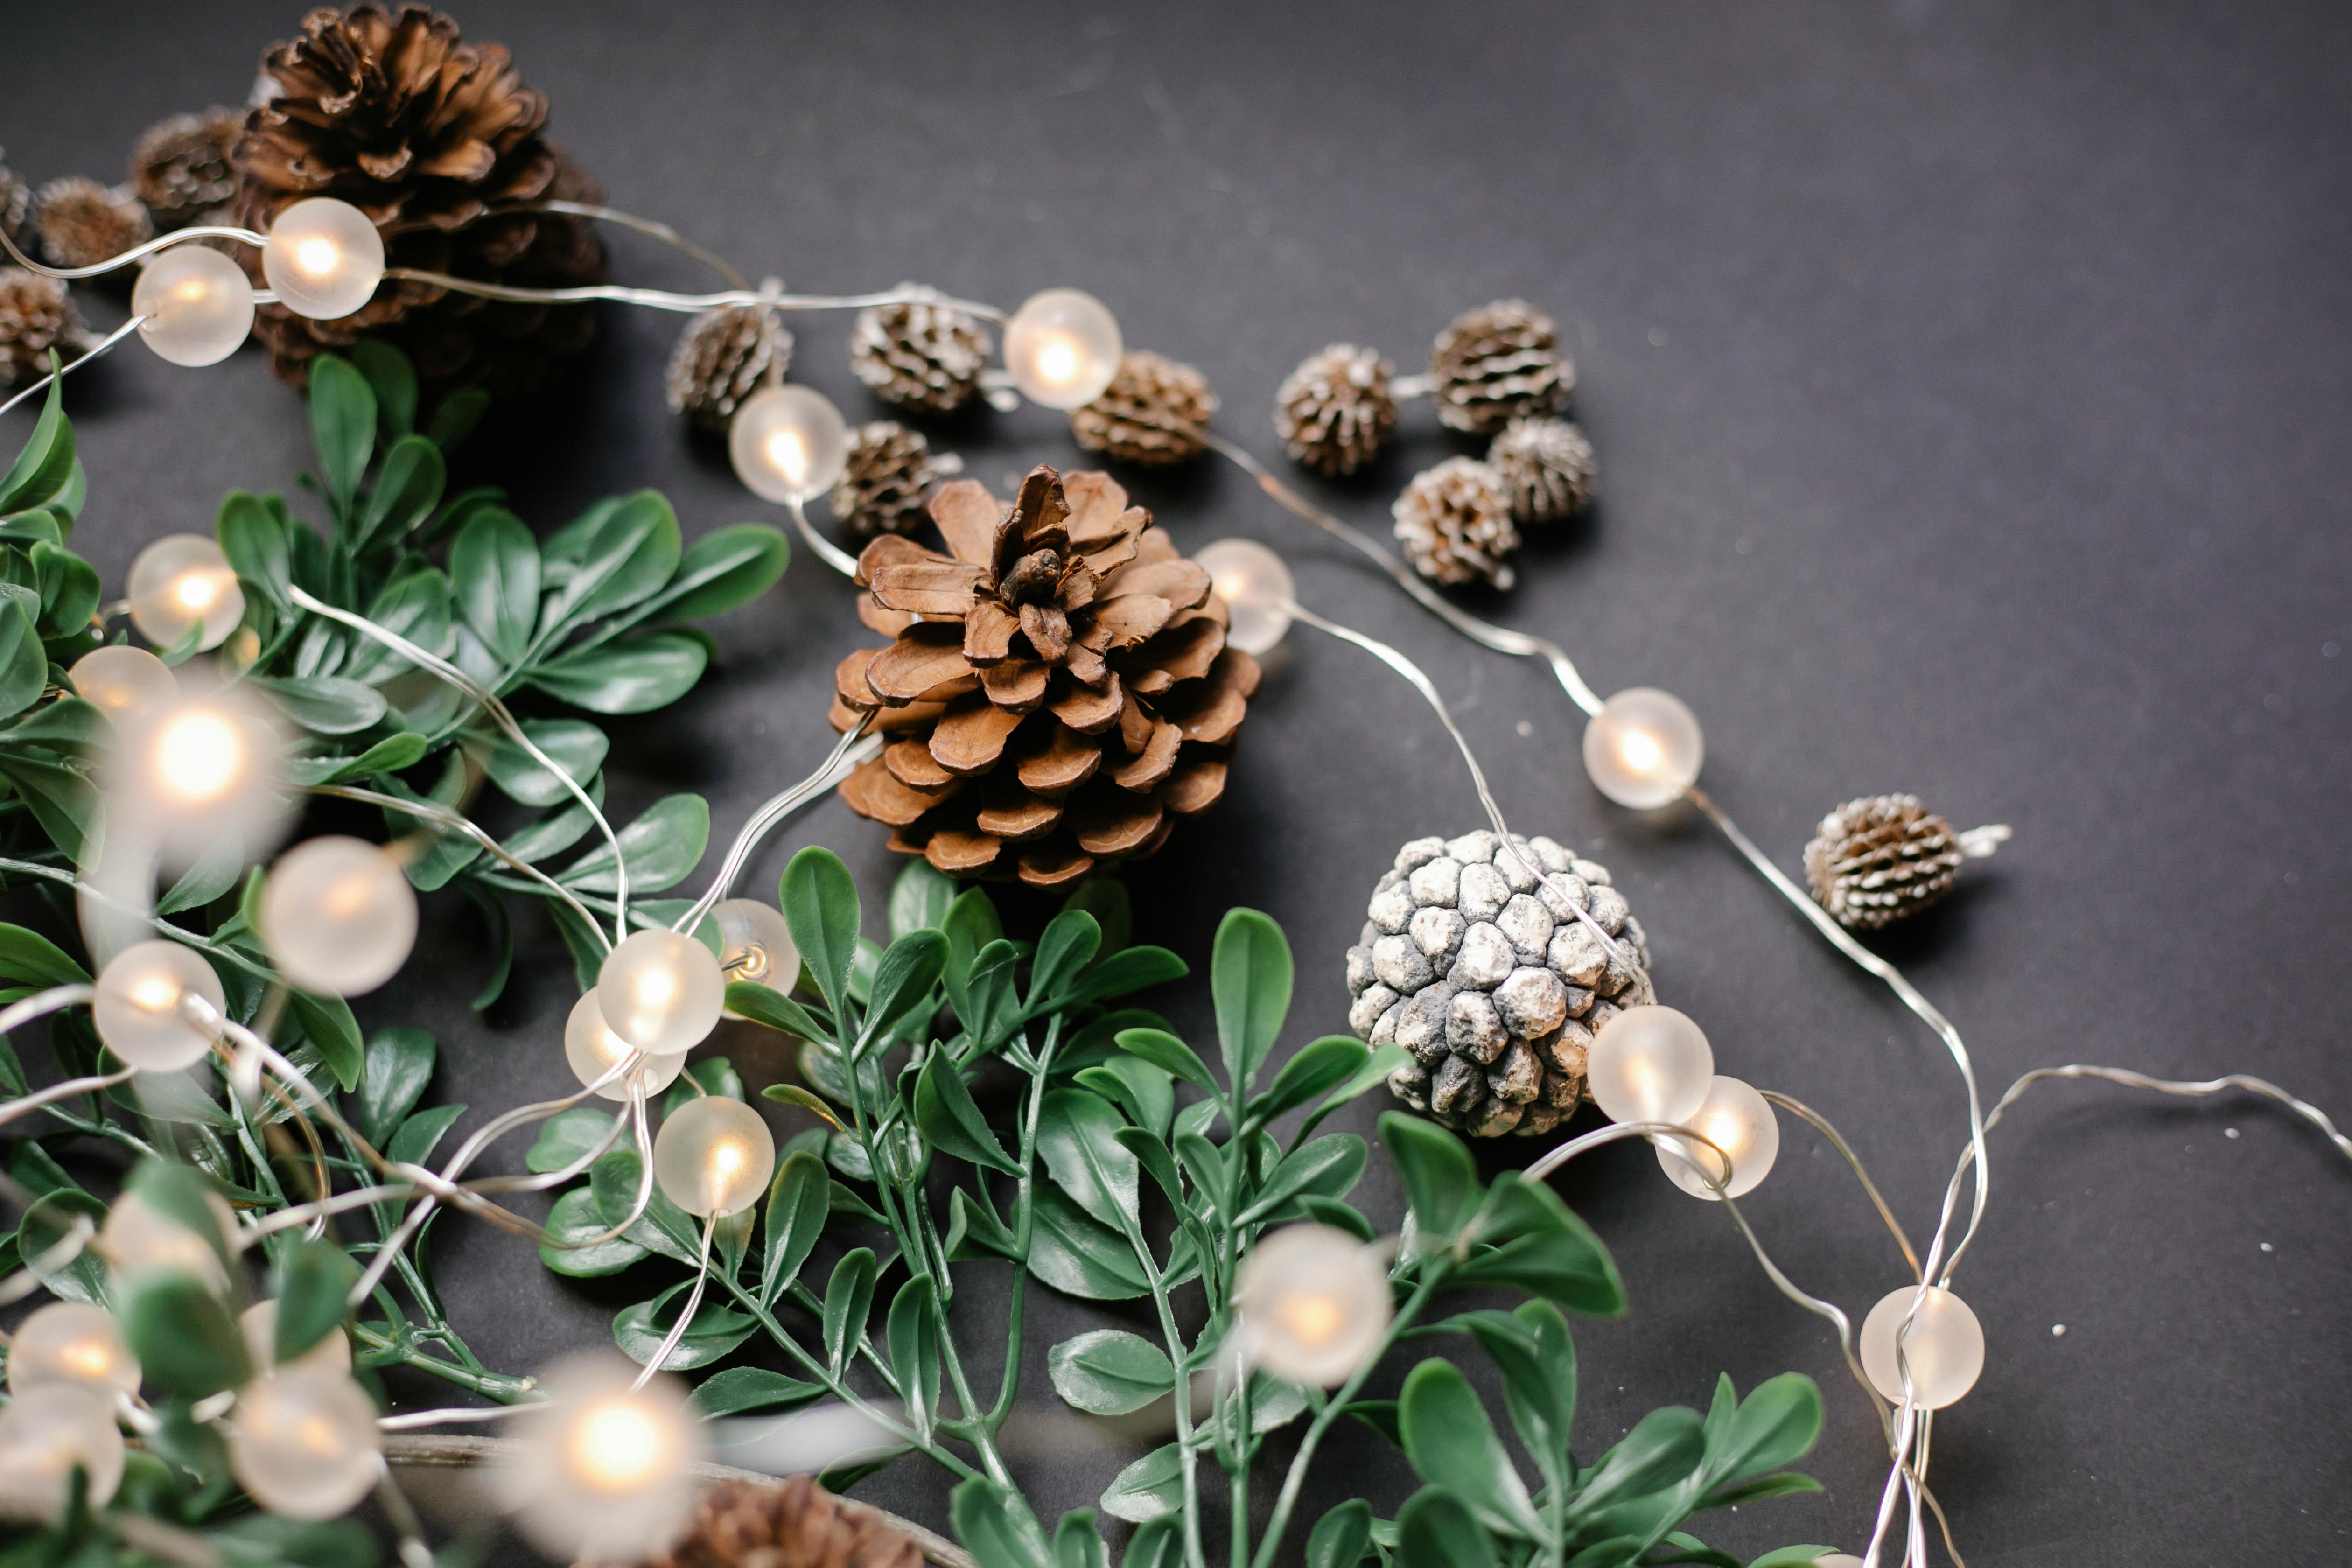 A garland with lights | Source: Pexels